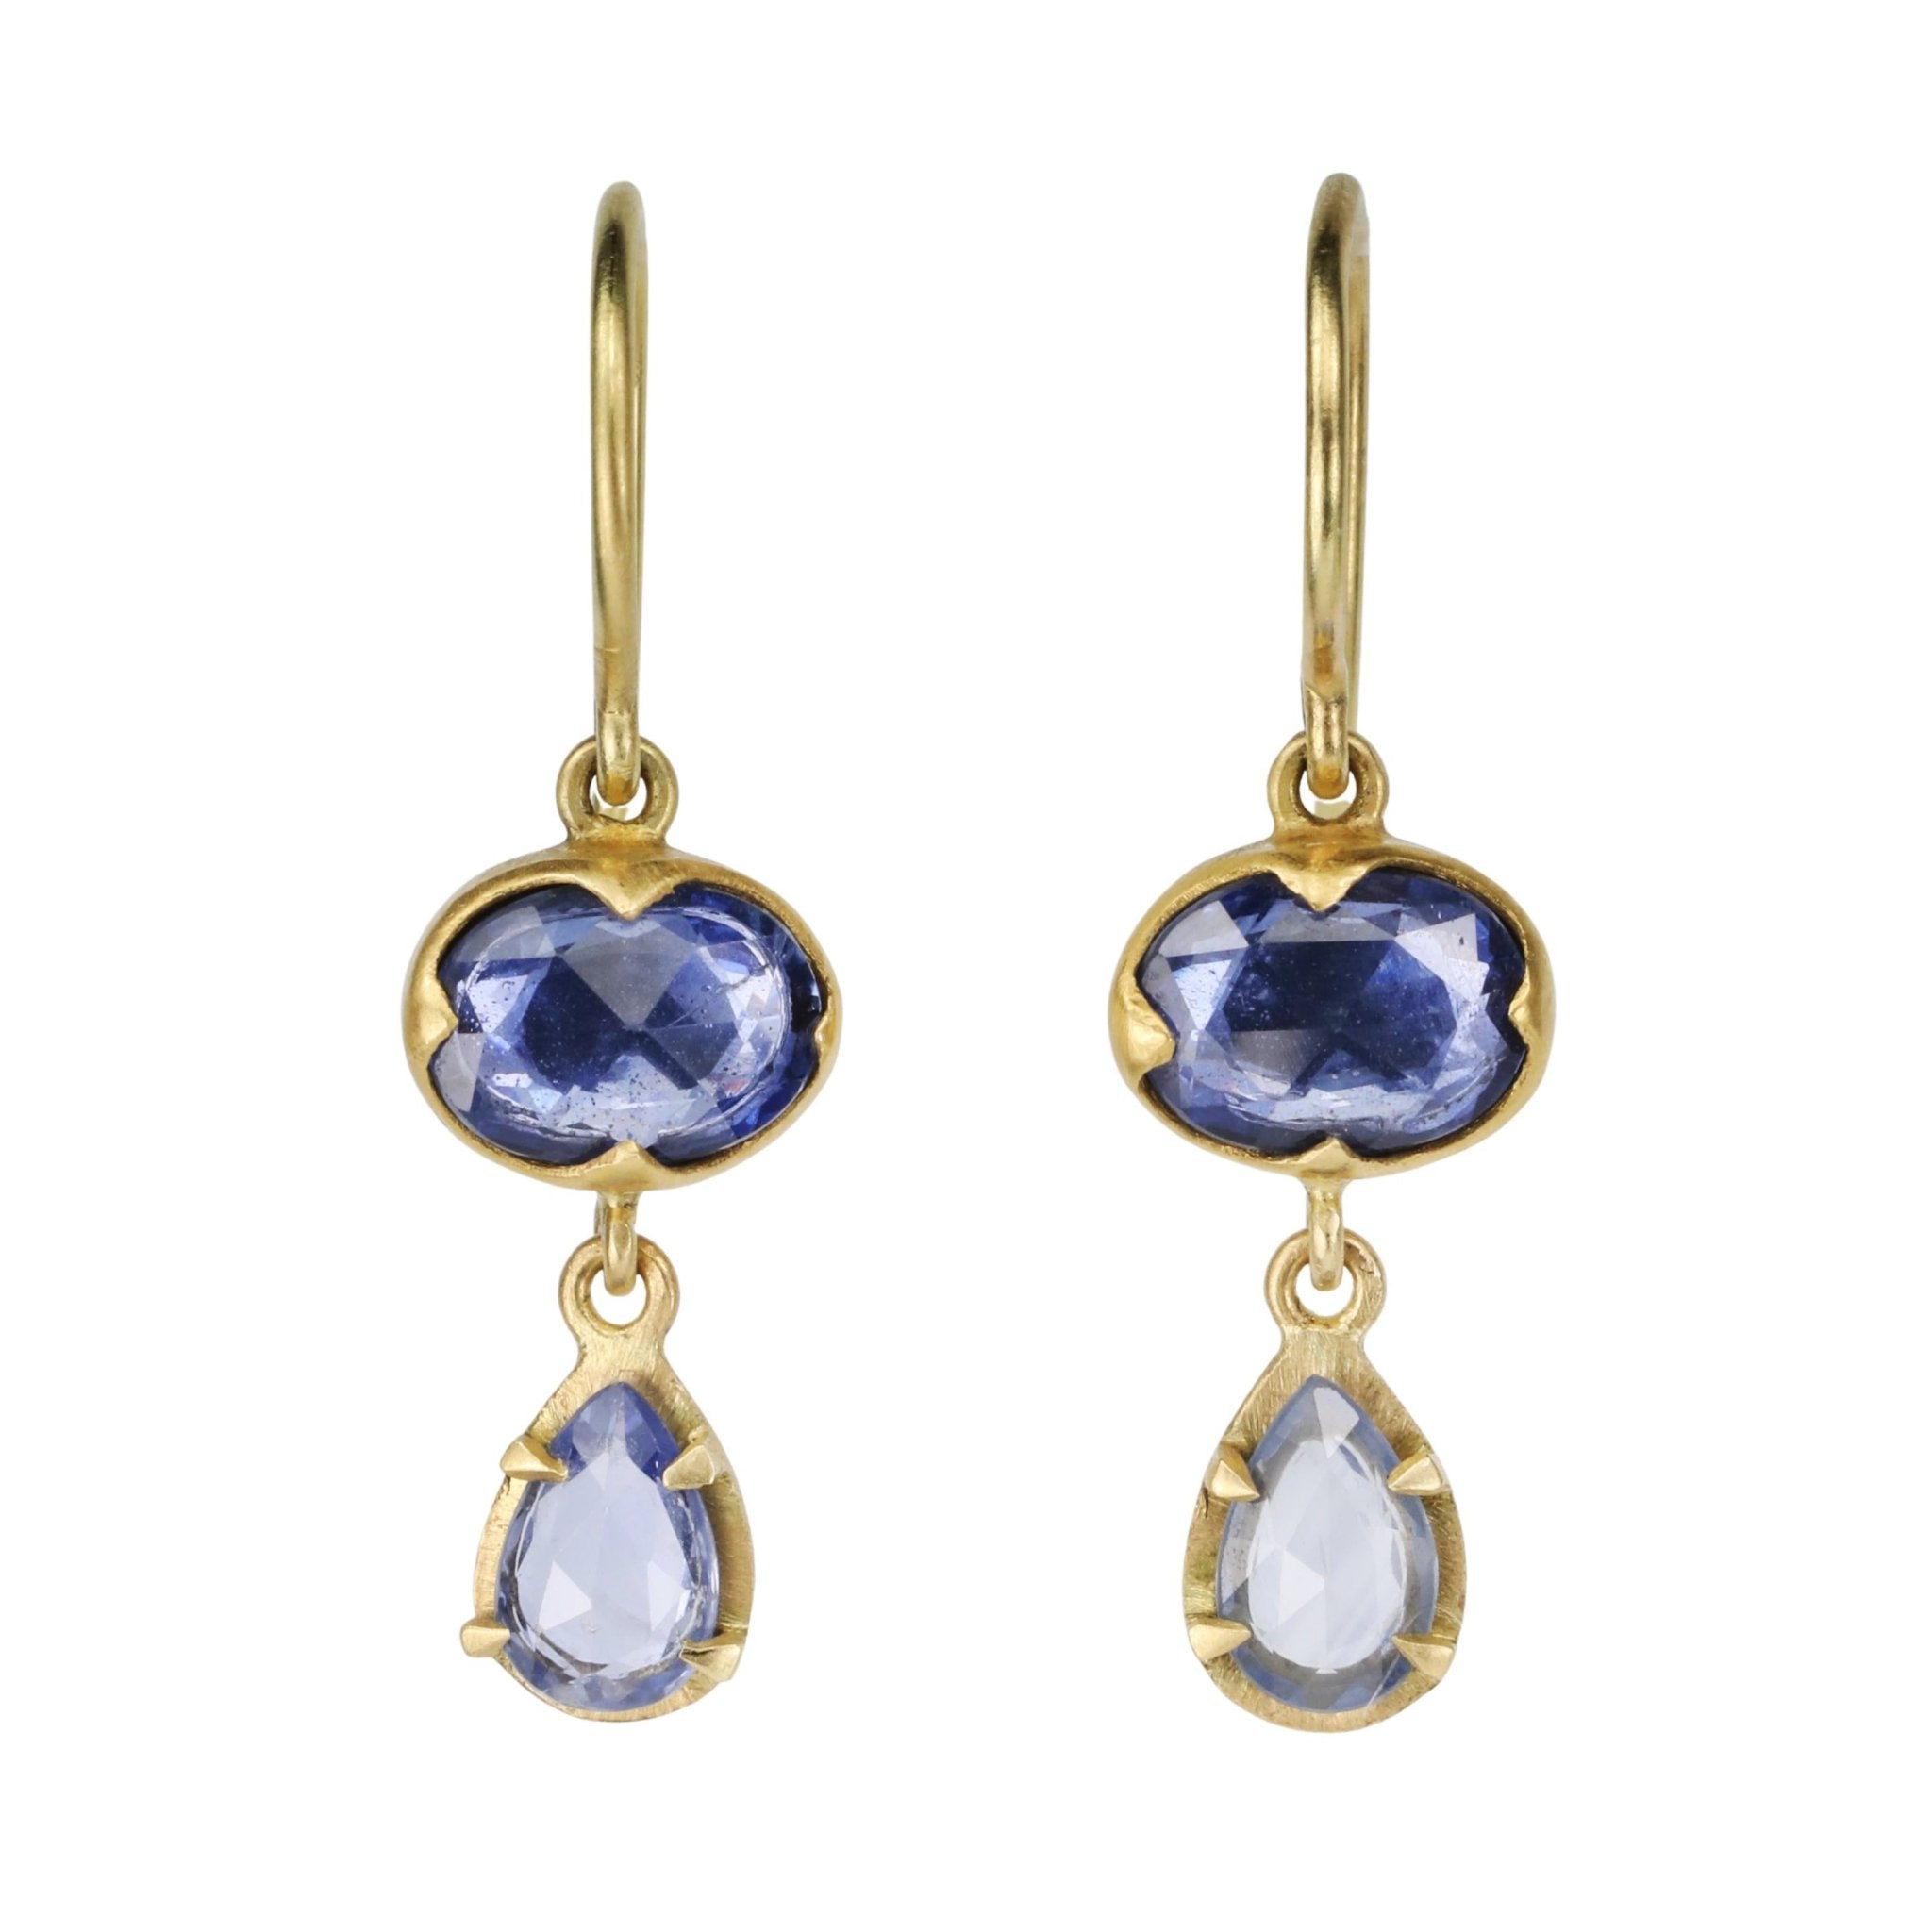 Annie Fensterstock Gold Double Drop Earrings with Blue Sapphires